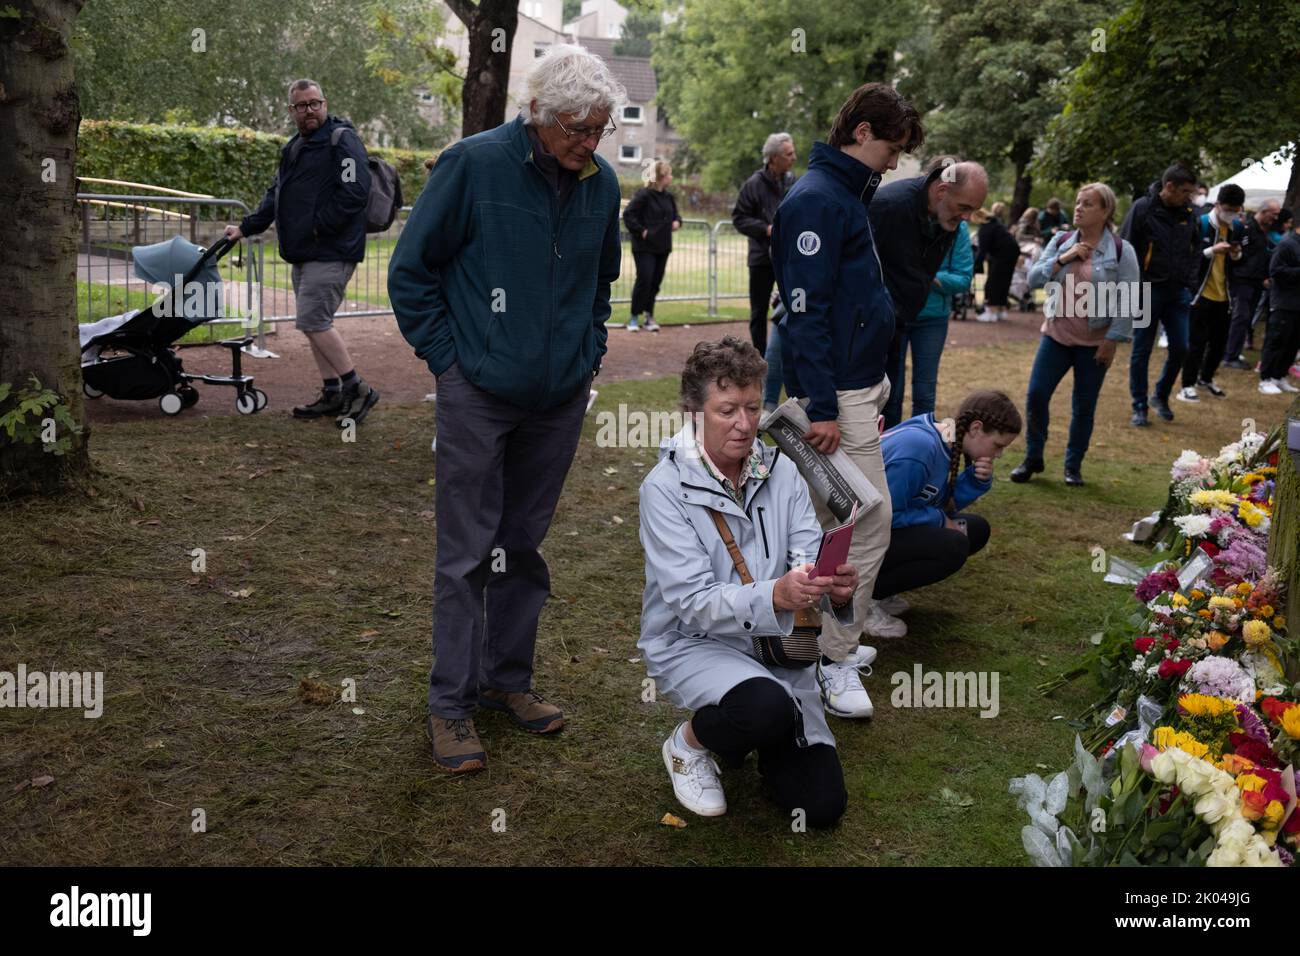 Edinburgh, Scotland, 9 September 2022. Laying flowers at Palace of Holyroodhouse as a mark of respect to Her Majesty Queen Elizabeth II, who has died aged 96, in Edinburgh, Scotland, 9 September 2022. Photo credit: Jeremy Sutton-Hibbert/ Alamy Live news. Stock Photo